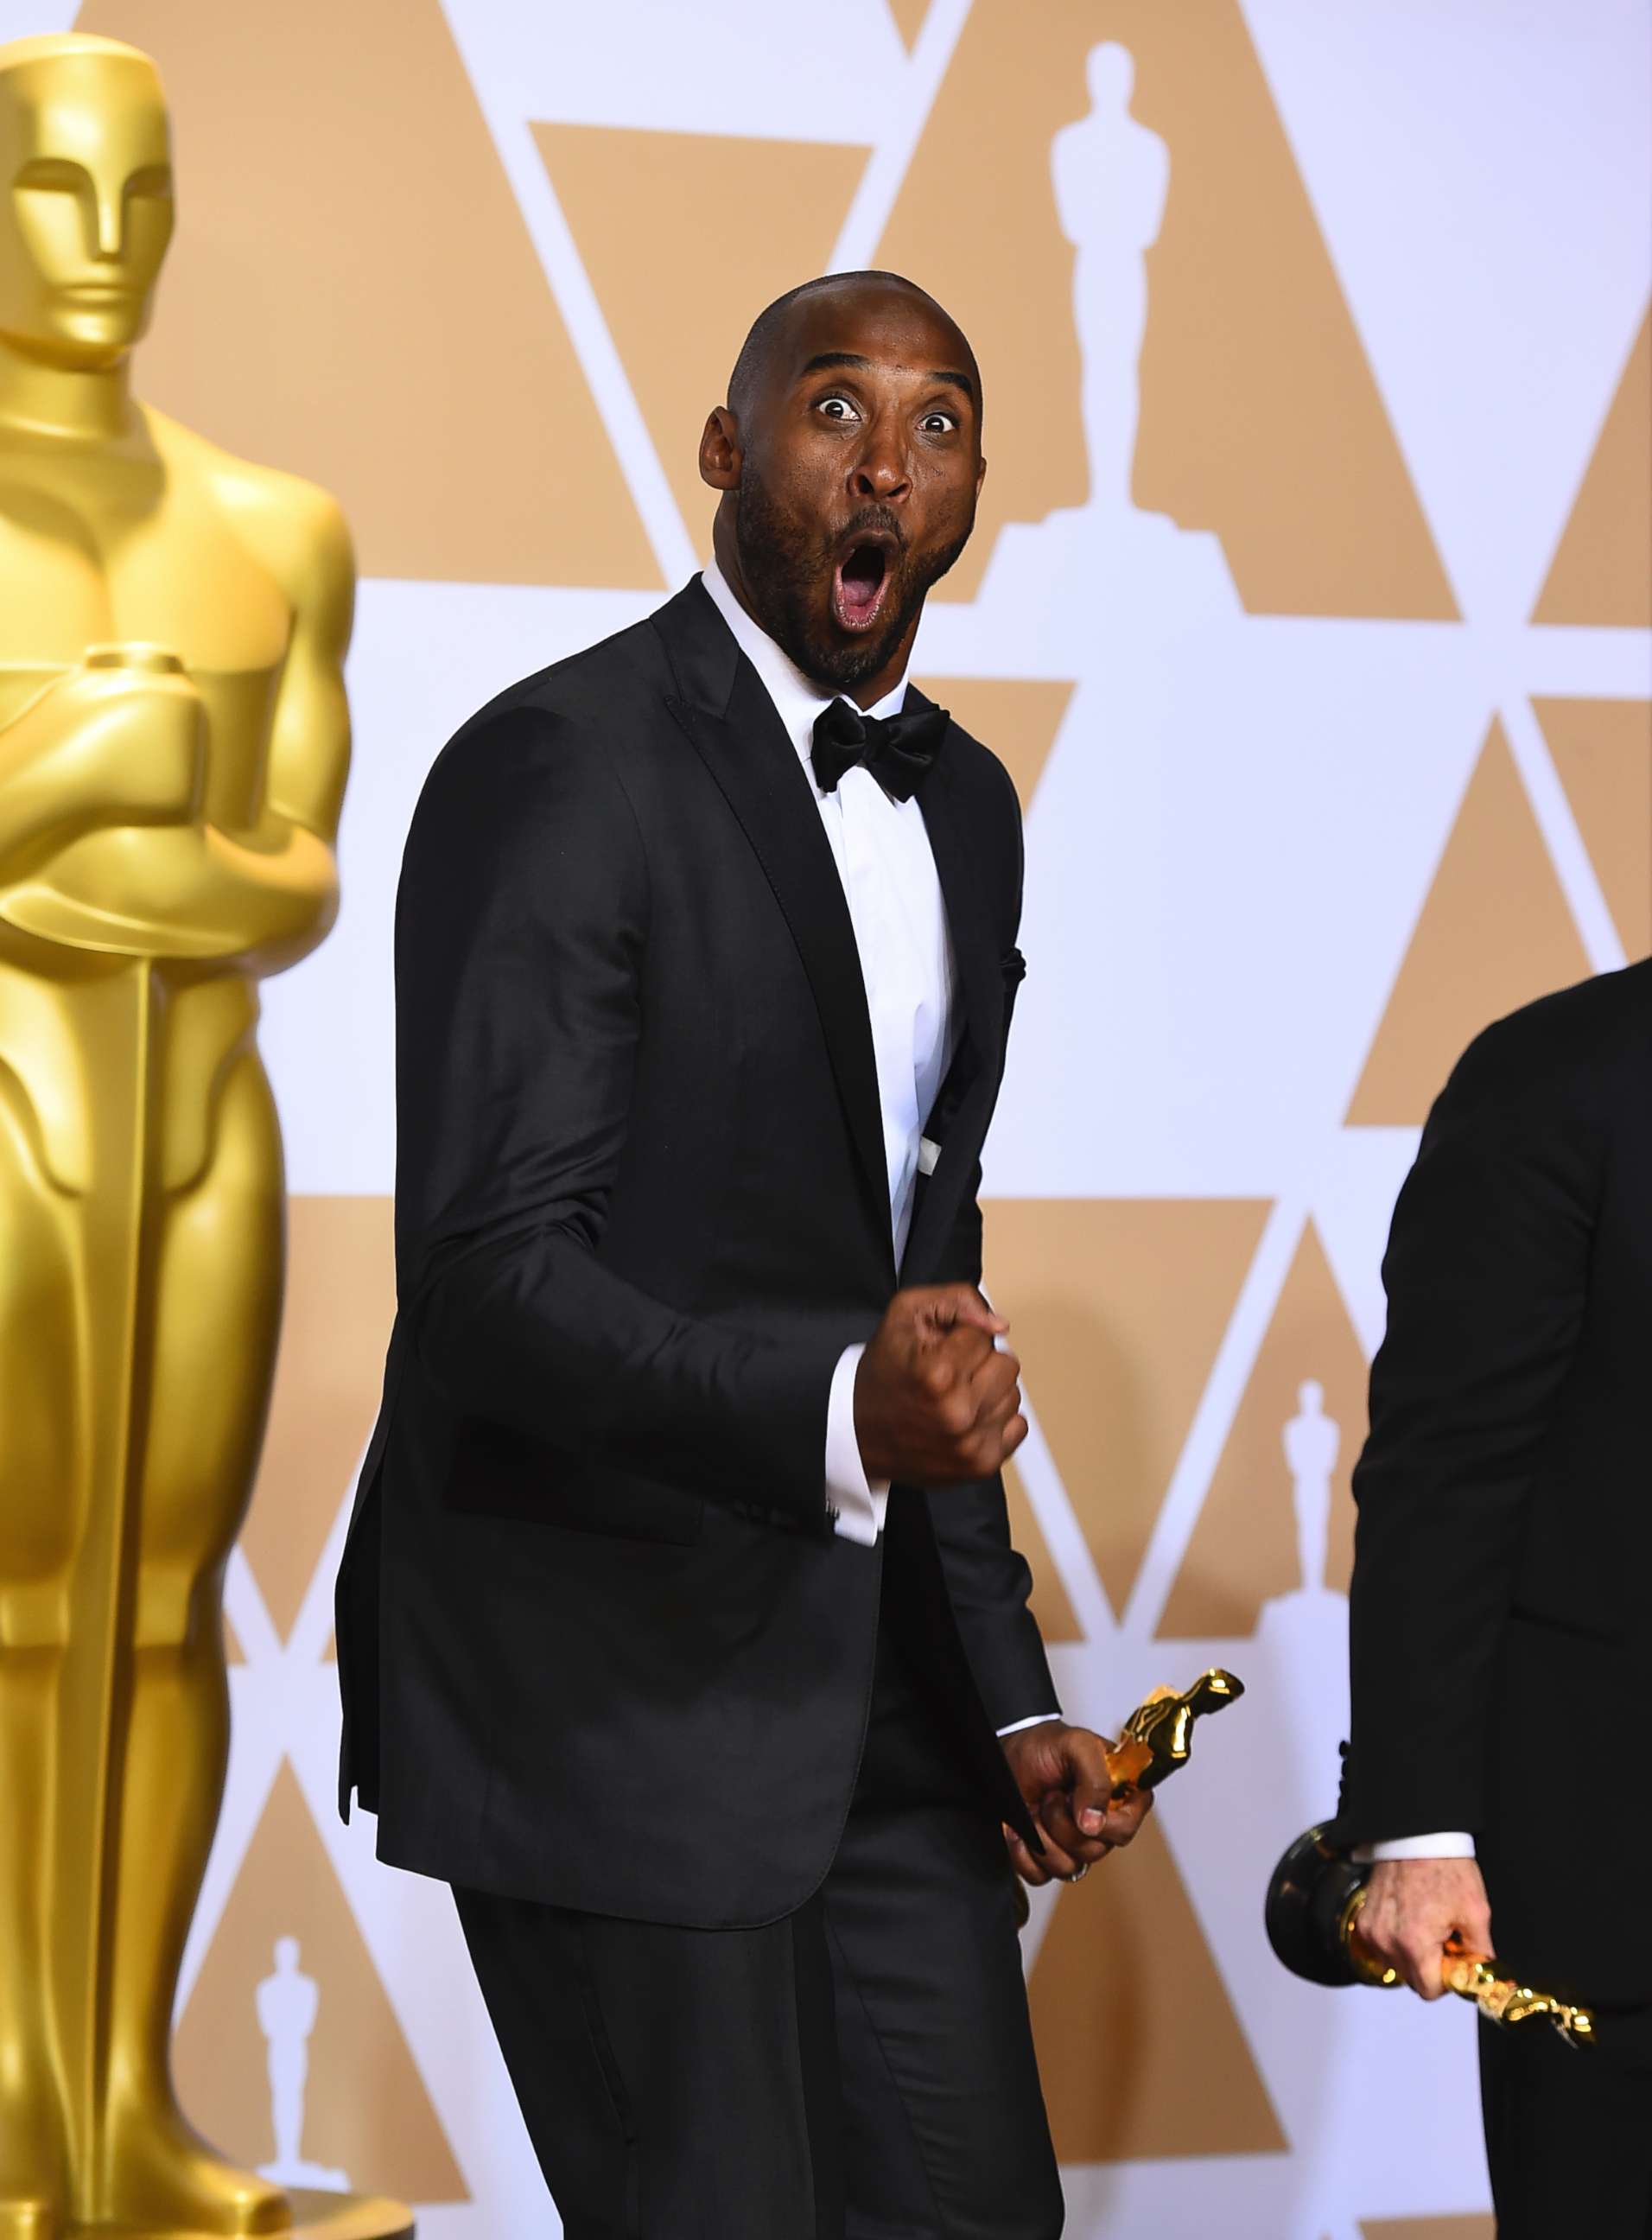 PHOTO: Kobe Bryant, winner of the award for best animated short for "Dear Basketball", celebrates in the press room at the Oscars, March 4, 2018, at the Dolby Theatre in Los Angeles.